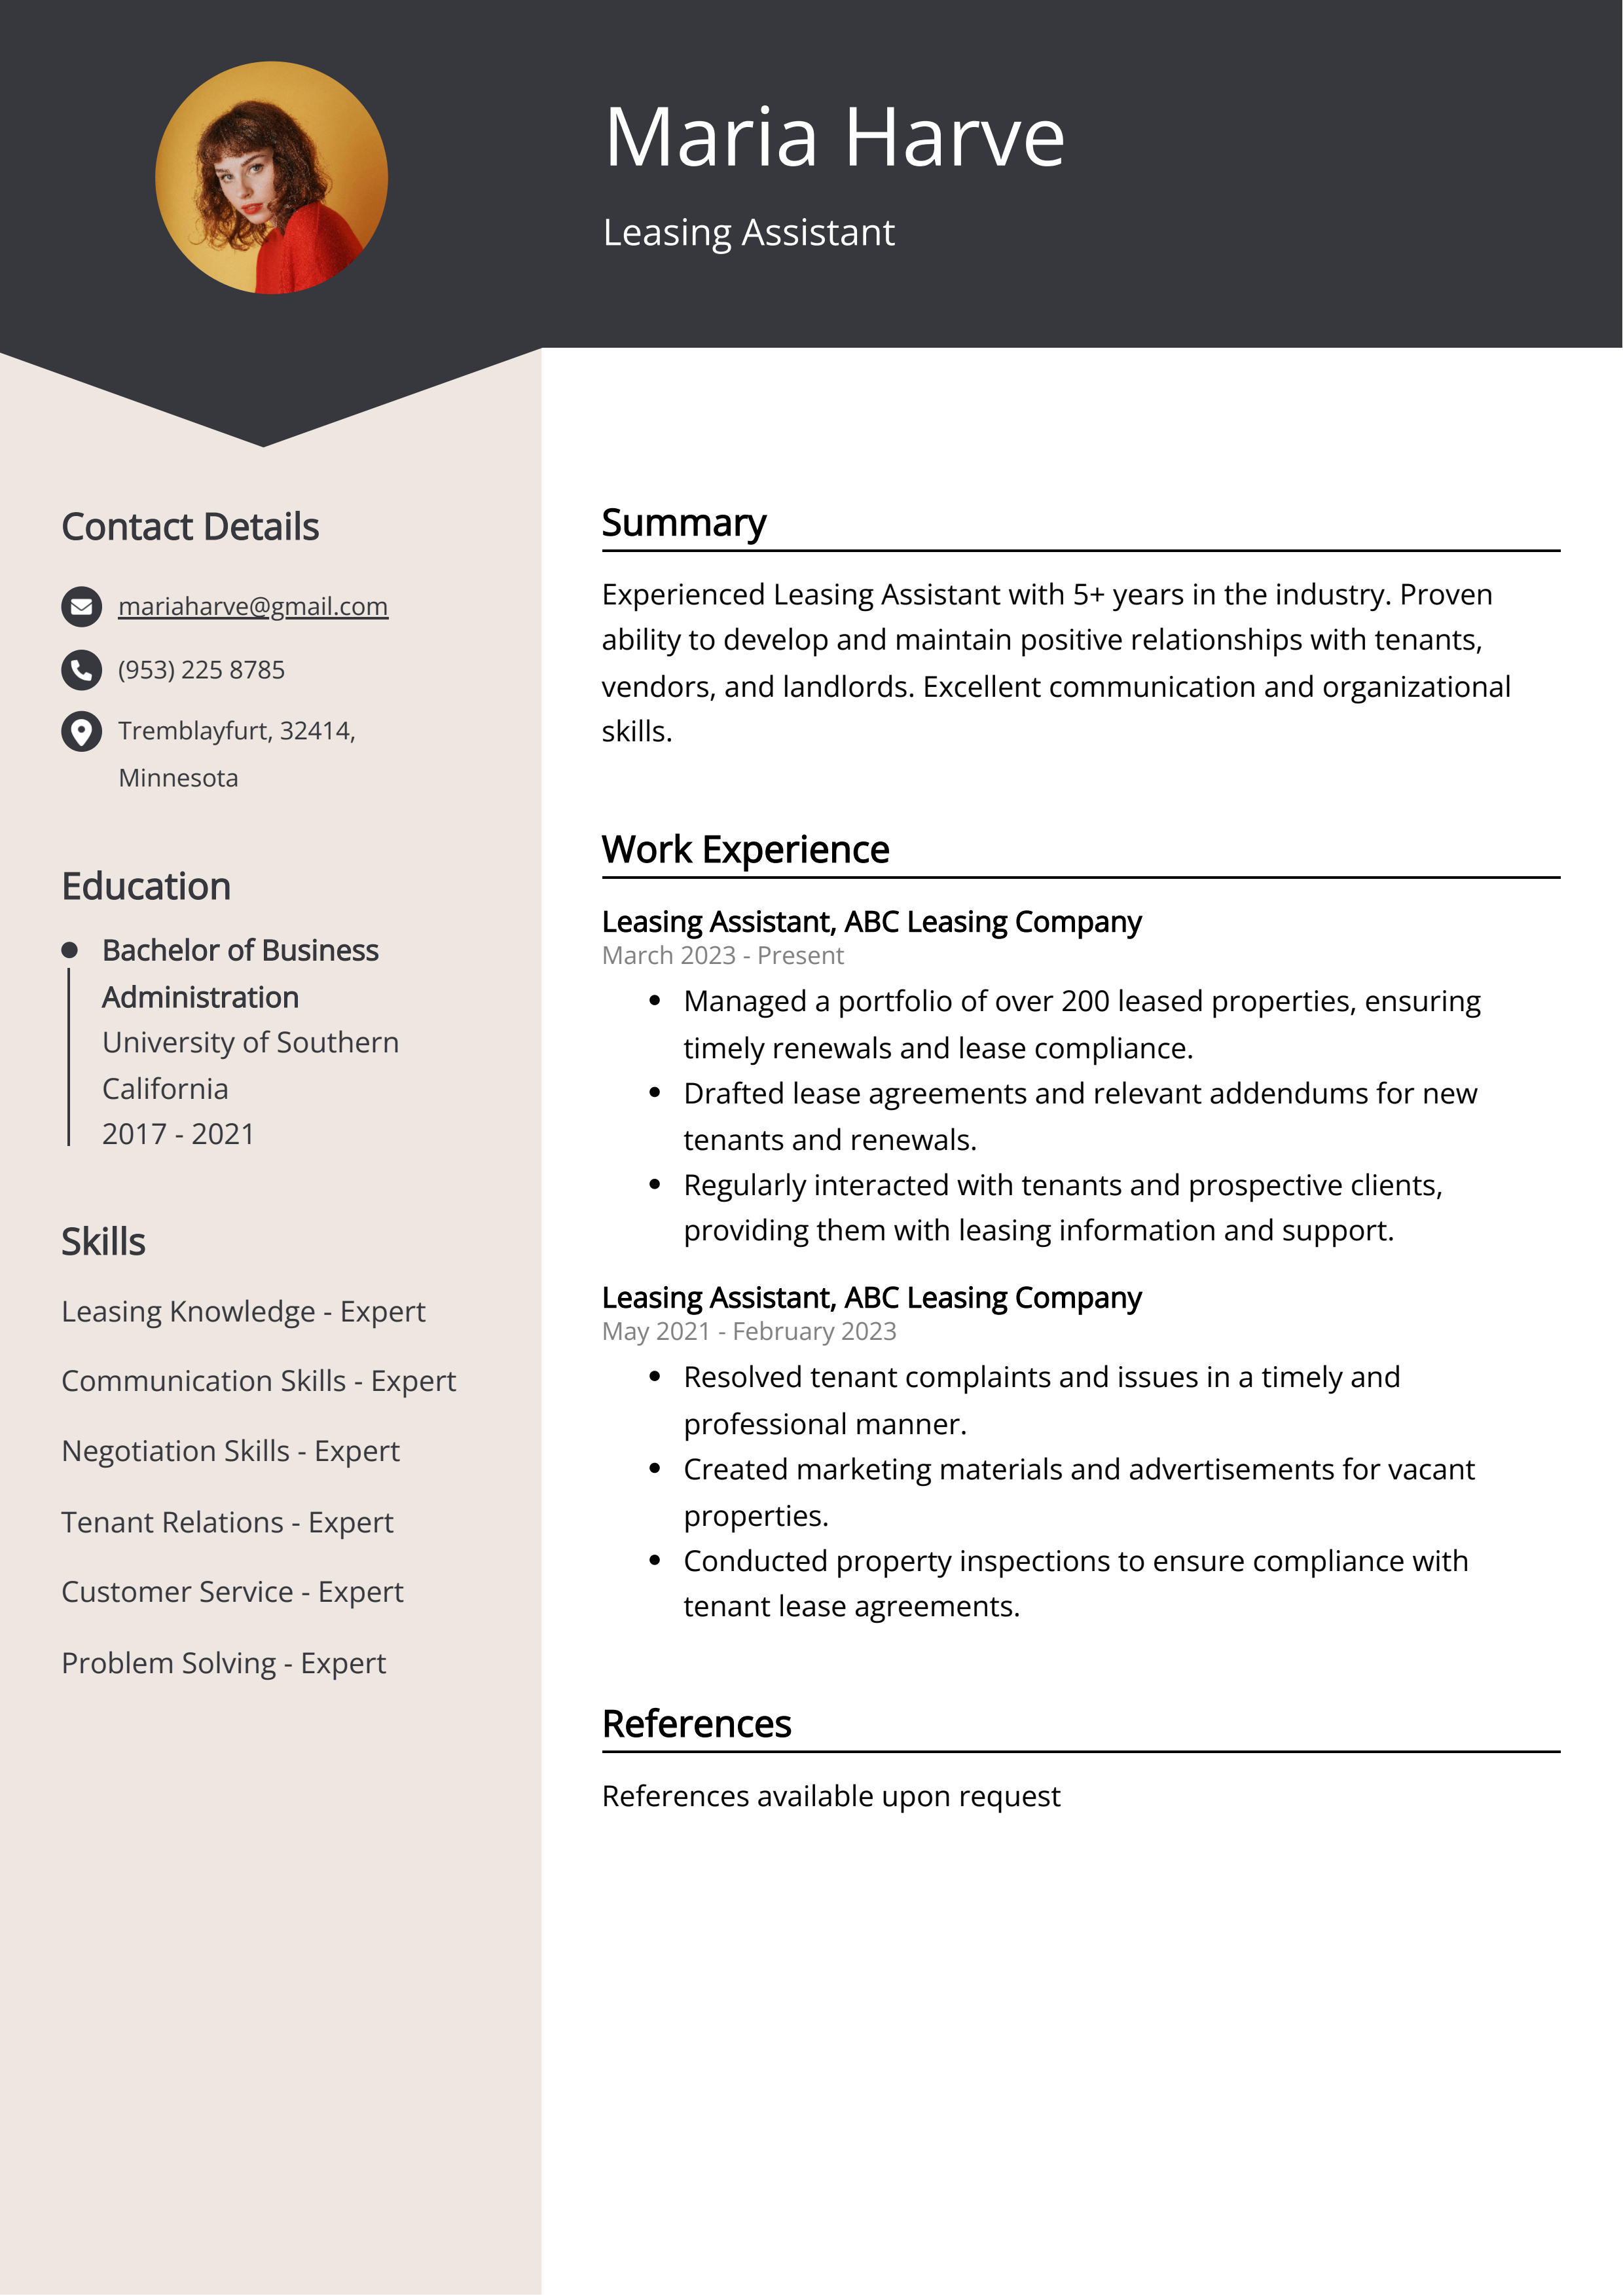 Leasing Assistant CV Example